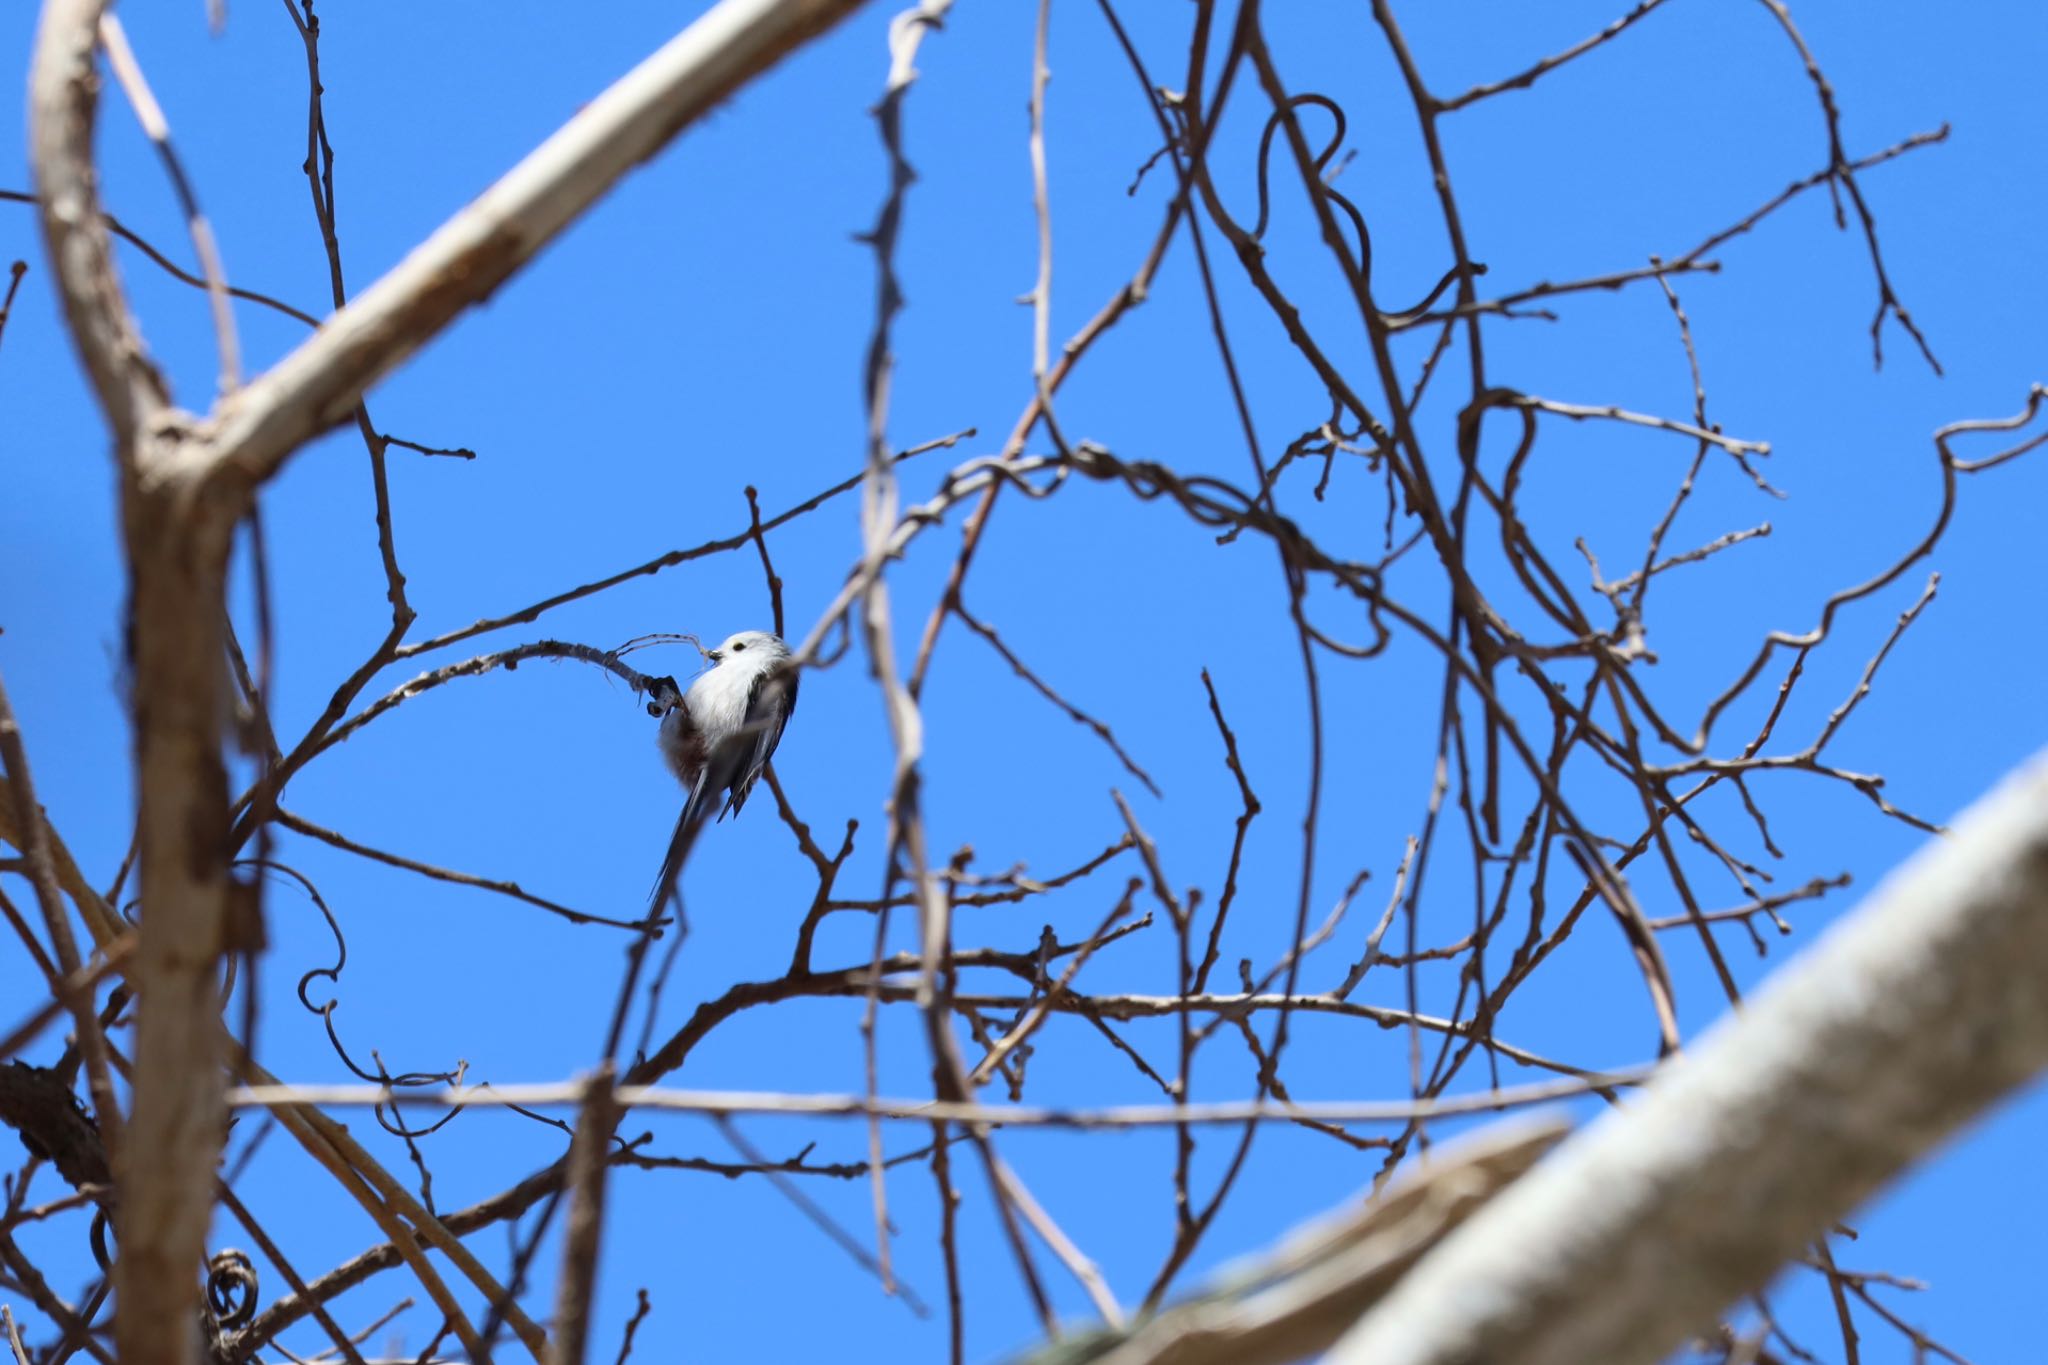 Photo of Long-tailed tit(japonicus) at 宮丘公園(札幌市西区) by Rika N